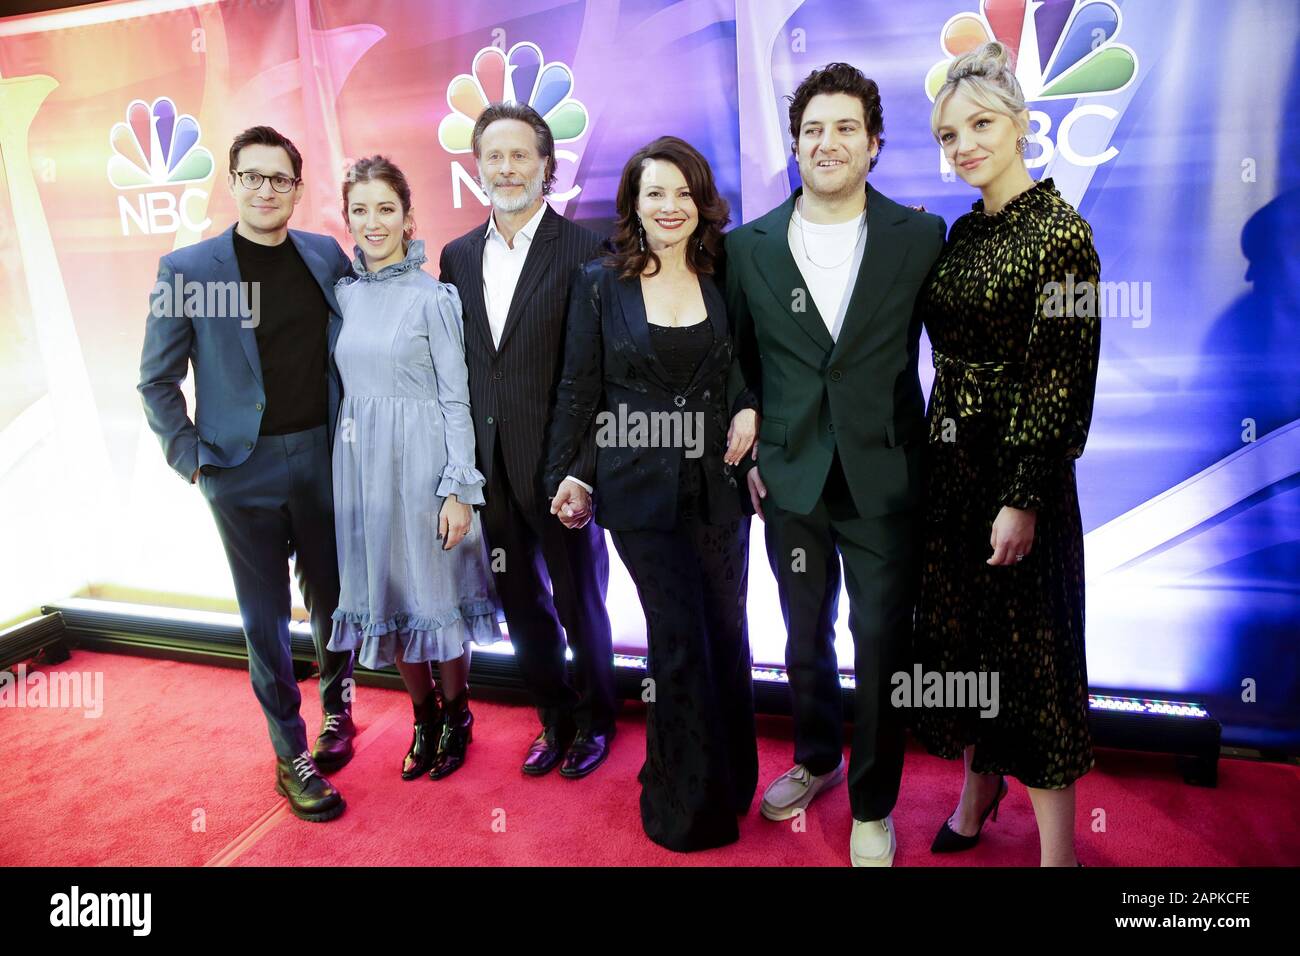 New York, United States. 23rd Jan, 2020. Dan Levy, Creator and Executive Producer, Jessy Hodges, Steven Weber, Fran Drescher, Adam Pally, Abby Elliott, 'Indebted' arrive on the red carpet at the NBC Midseason New York Press Junket at Four Seasons Hotel New York on Thursday, January 23, 2020 in New York City. Photo by John Angelillo/UPI Credit: UPI/Alamy Live News Stock Photo